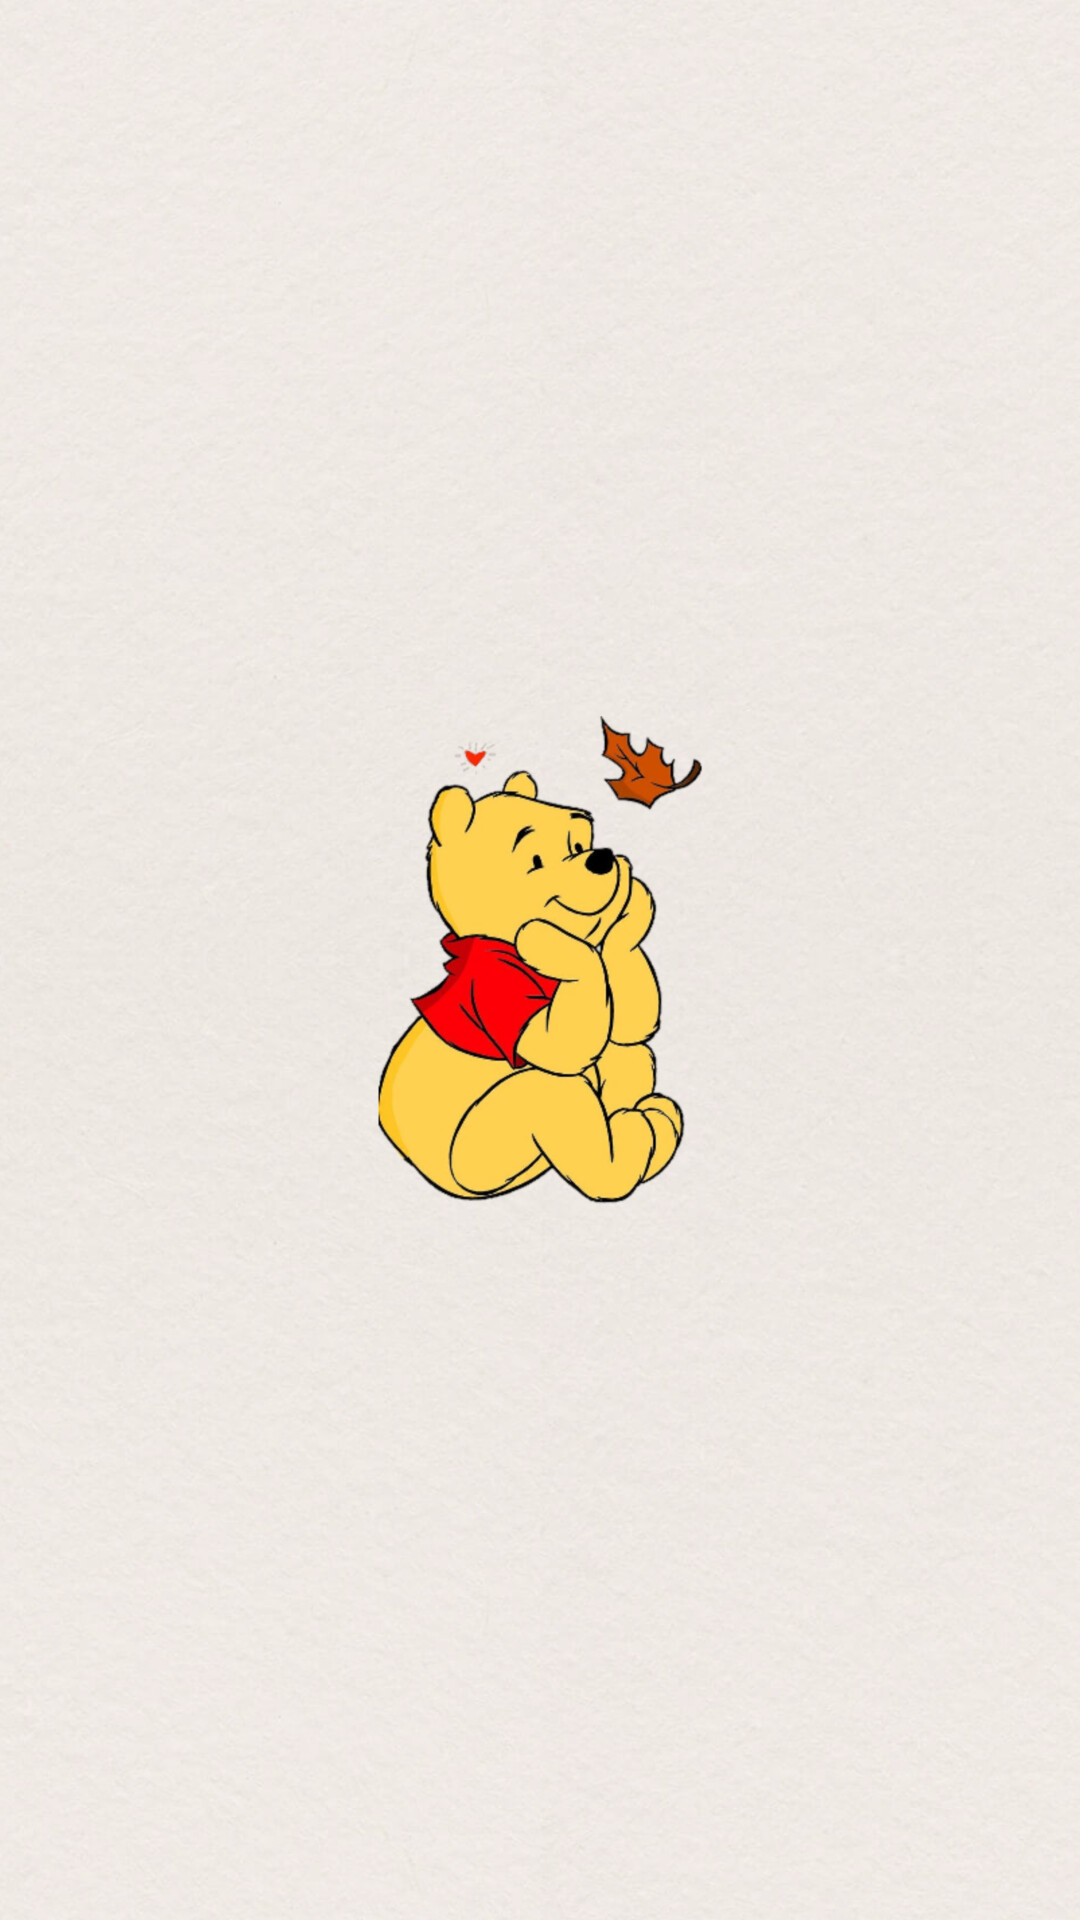 The Many Adventures of Winnie the Pooh: After Christopher Robin, Pooh's closest friend is Piglet, and he most often chooses to spend his time with one or both of them. 1080x1920 Full HD Background.